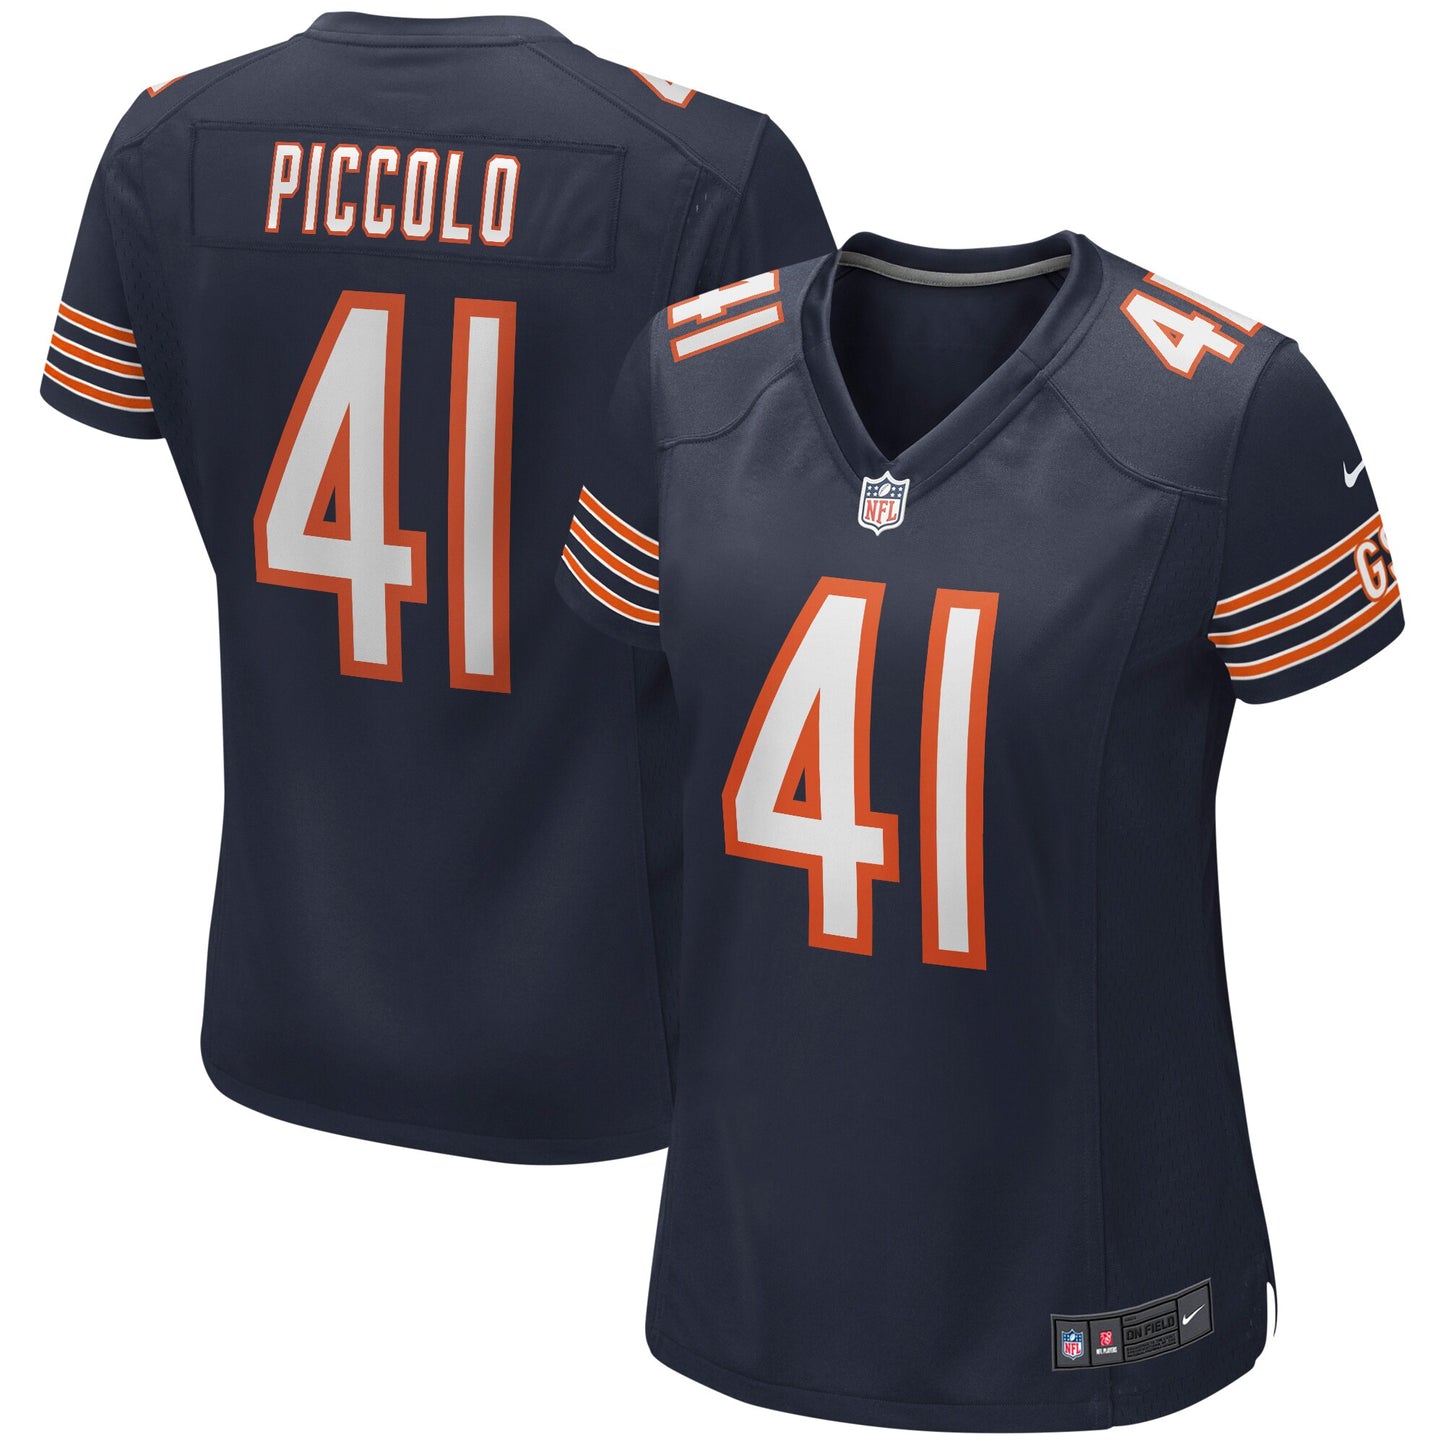 Brian Piccolo Chicago Bears Nike Women's Game Retired Player Jersey - Navy